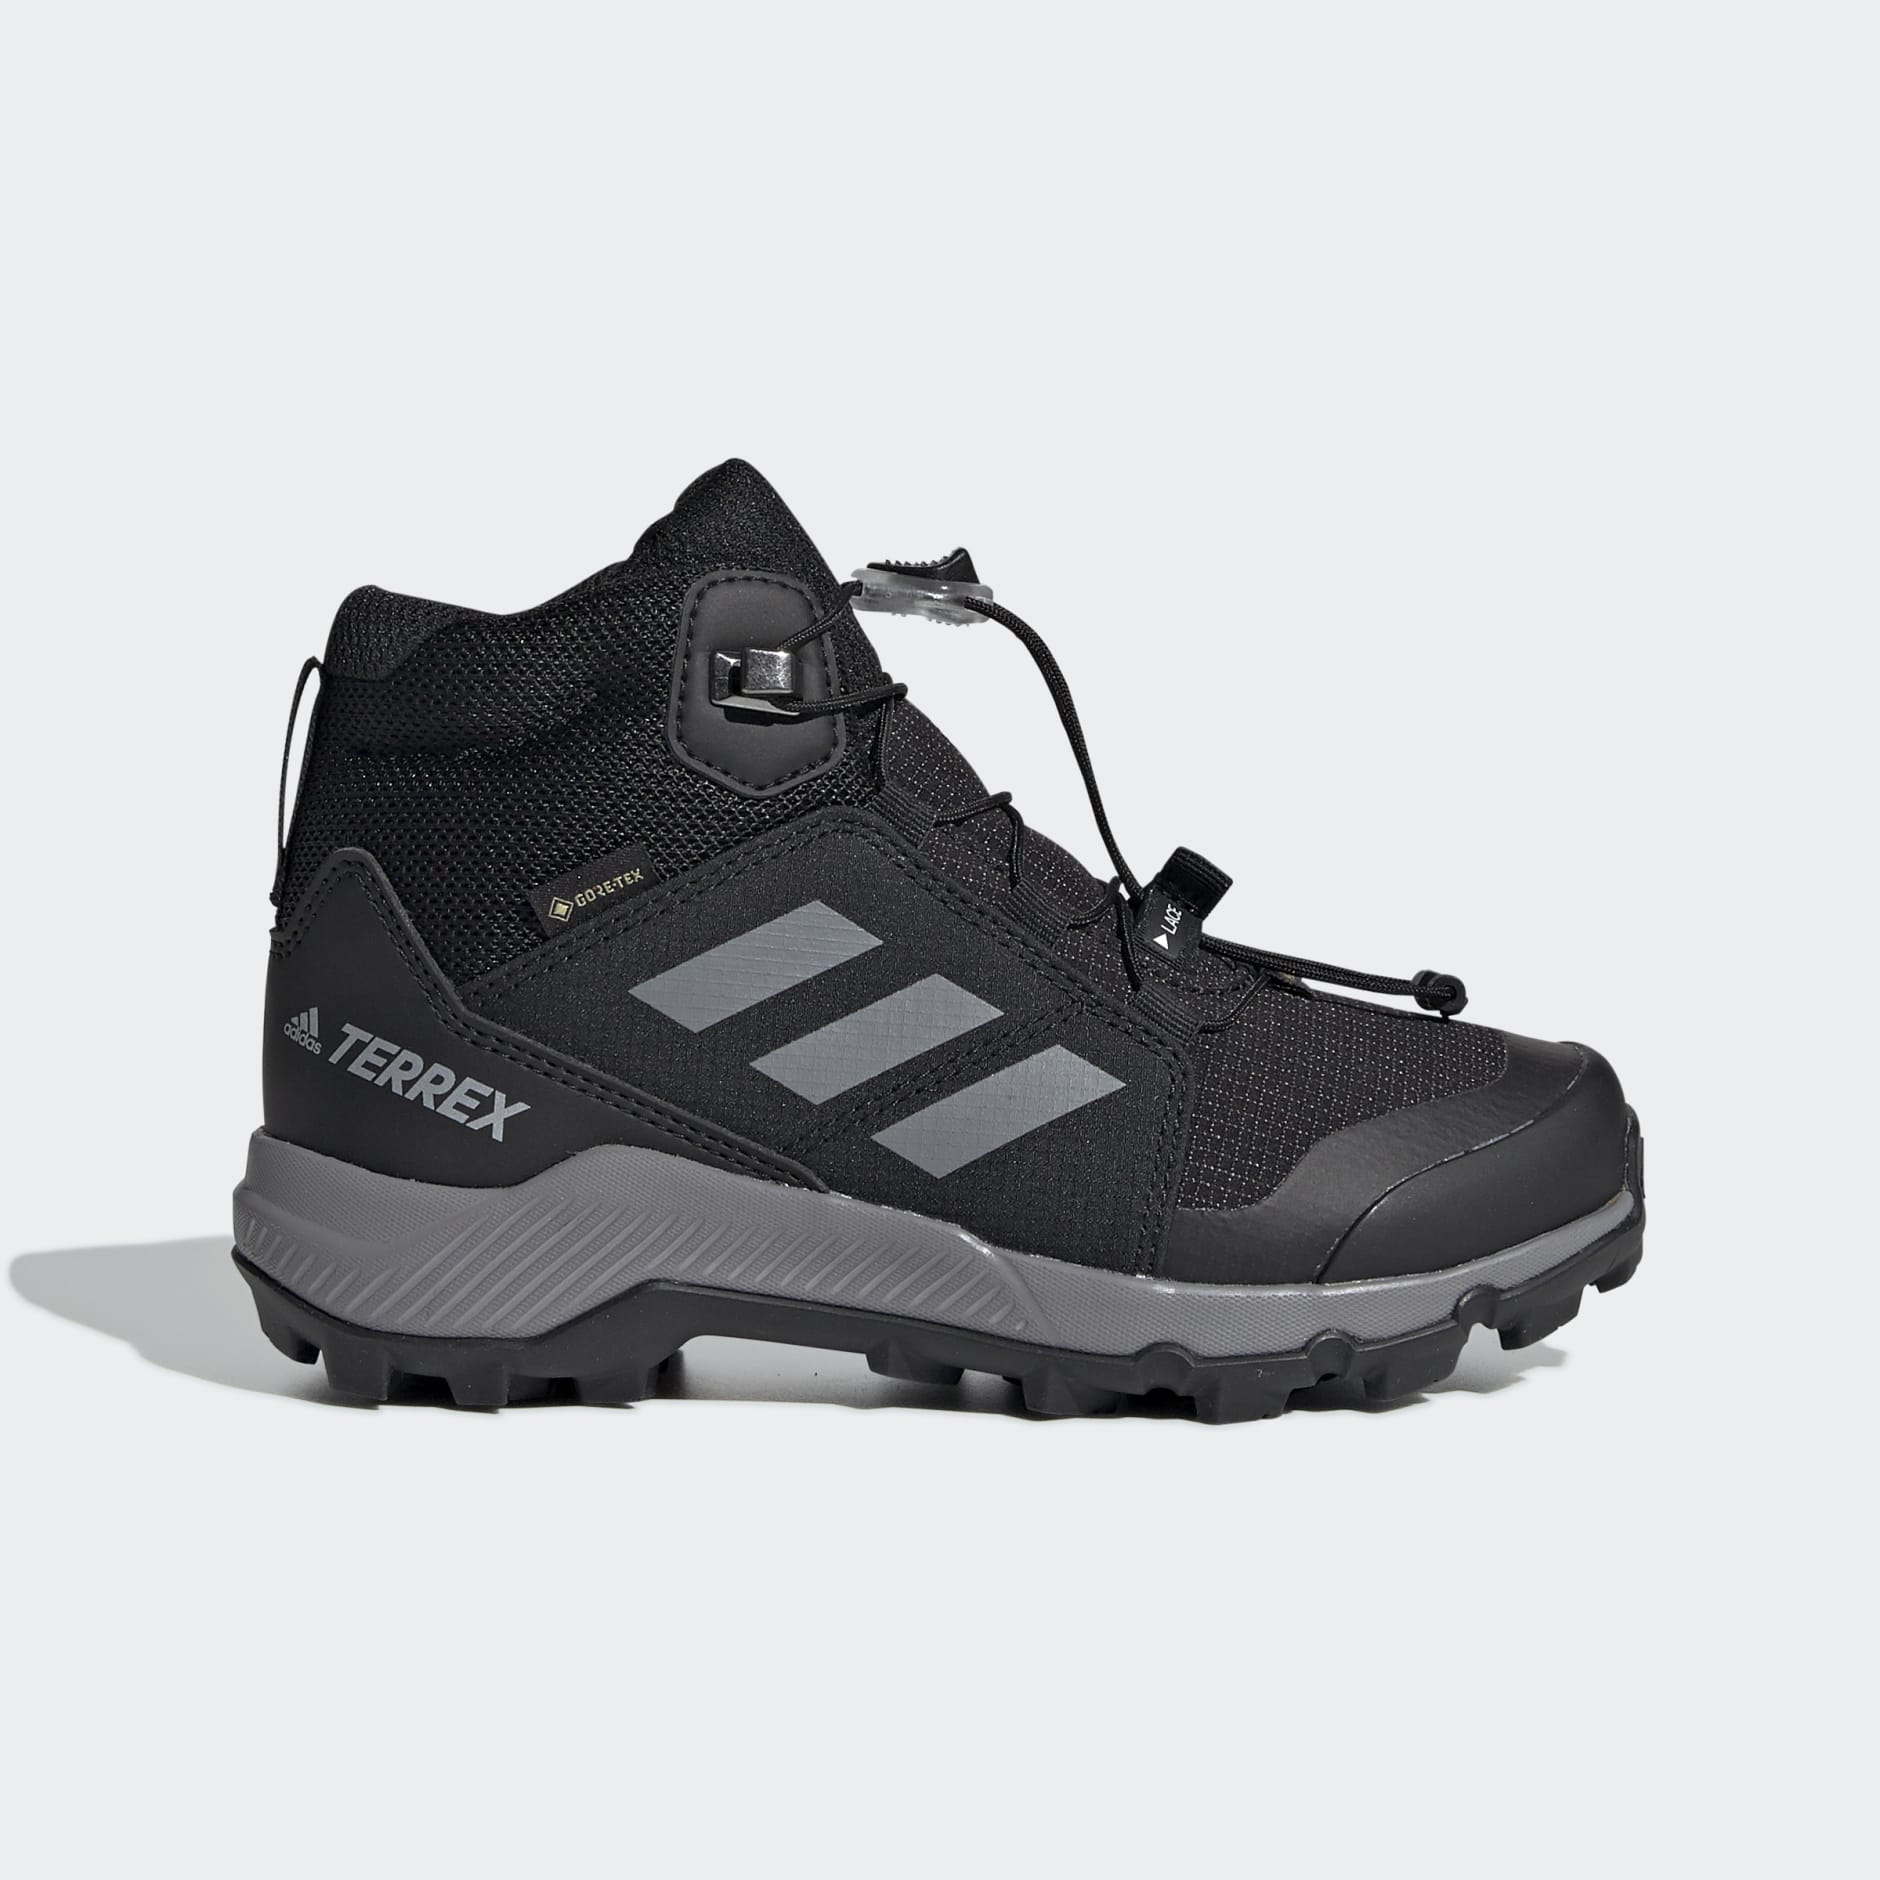 Shoes - Terrex Mid GORE-TEX Hiking Shoes - Black | adidas South Africa